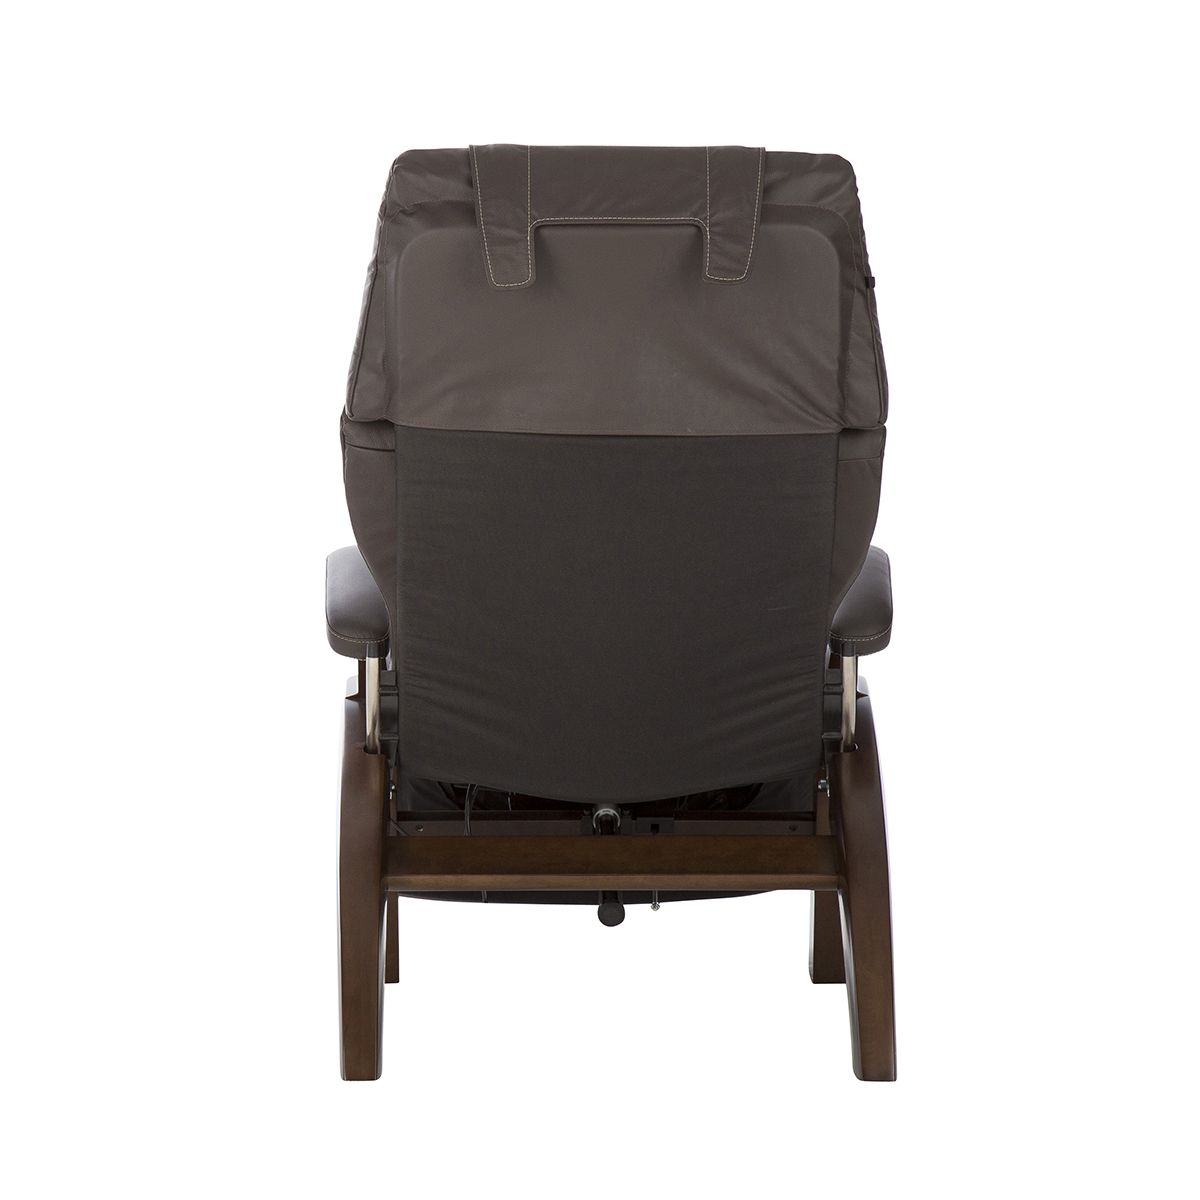 Perfect Chair PC-350 Classic Power back